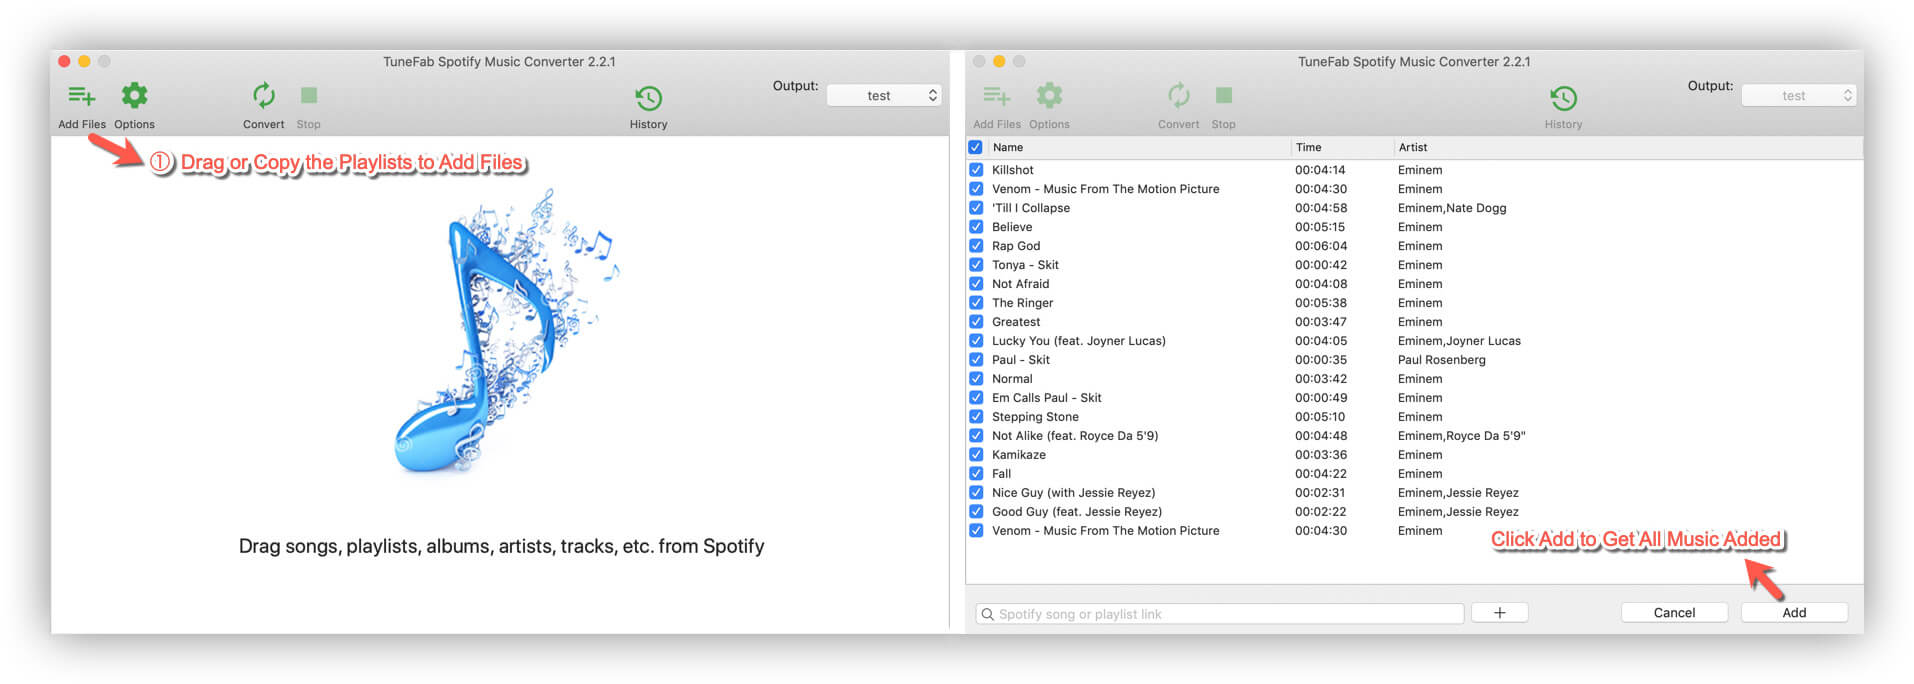 How Long Does It Take To Download Songs From Spotify